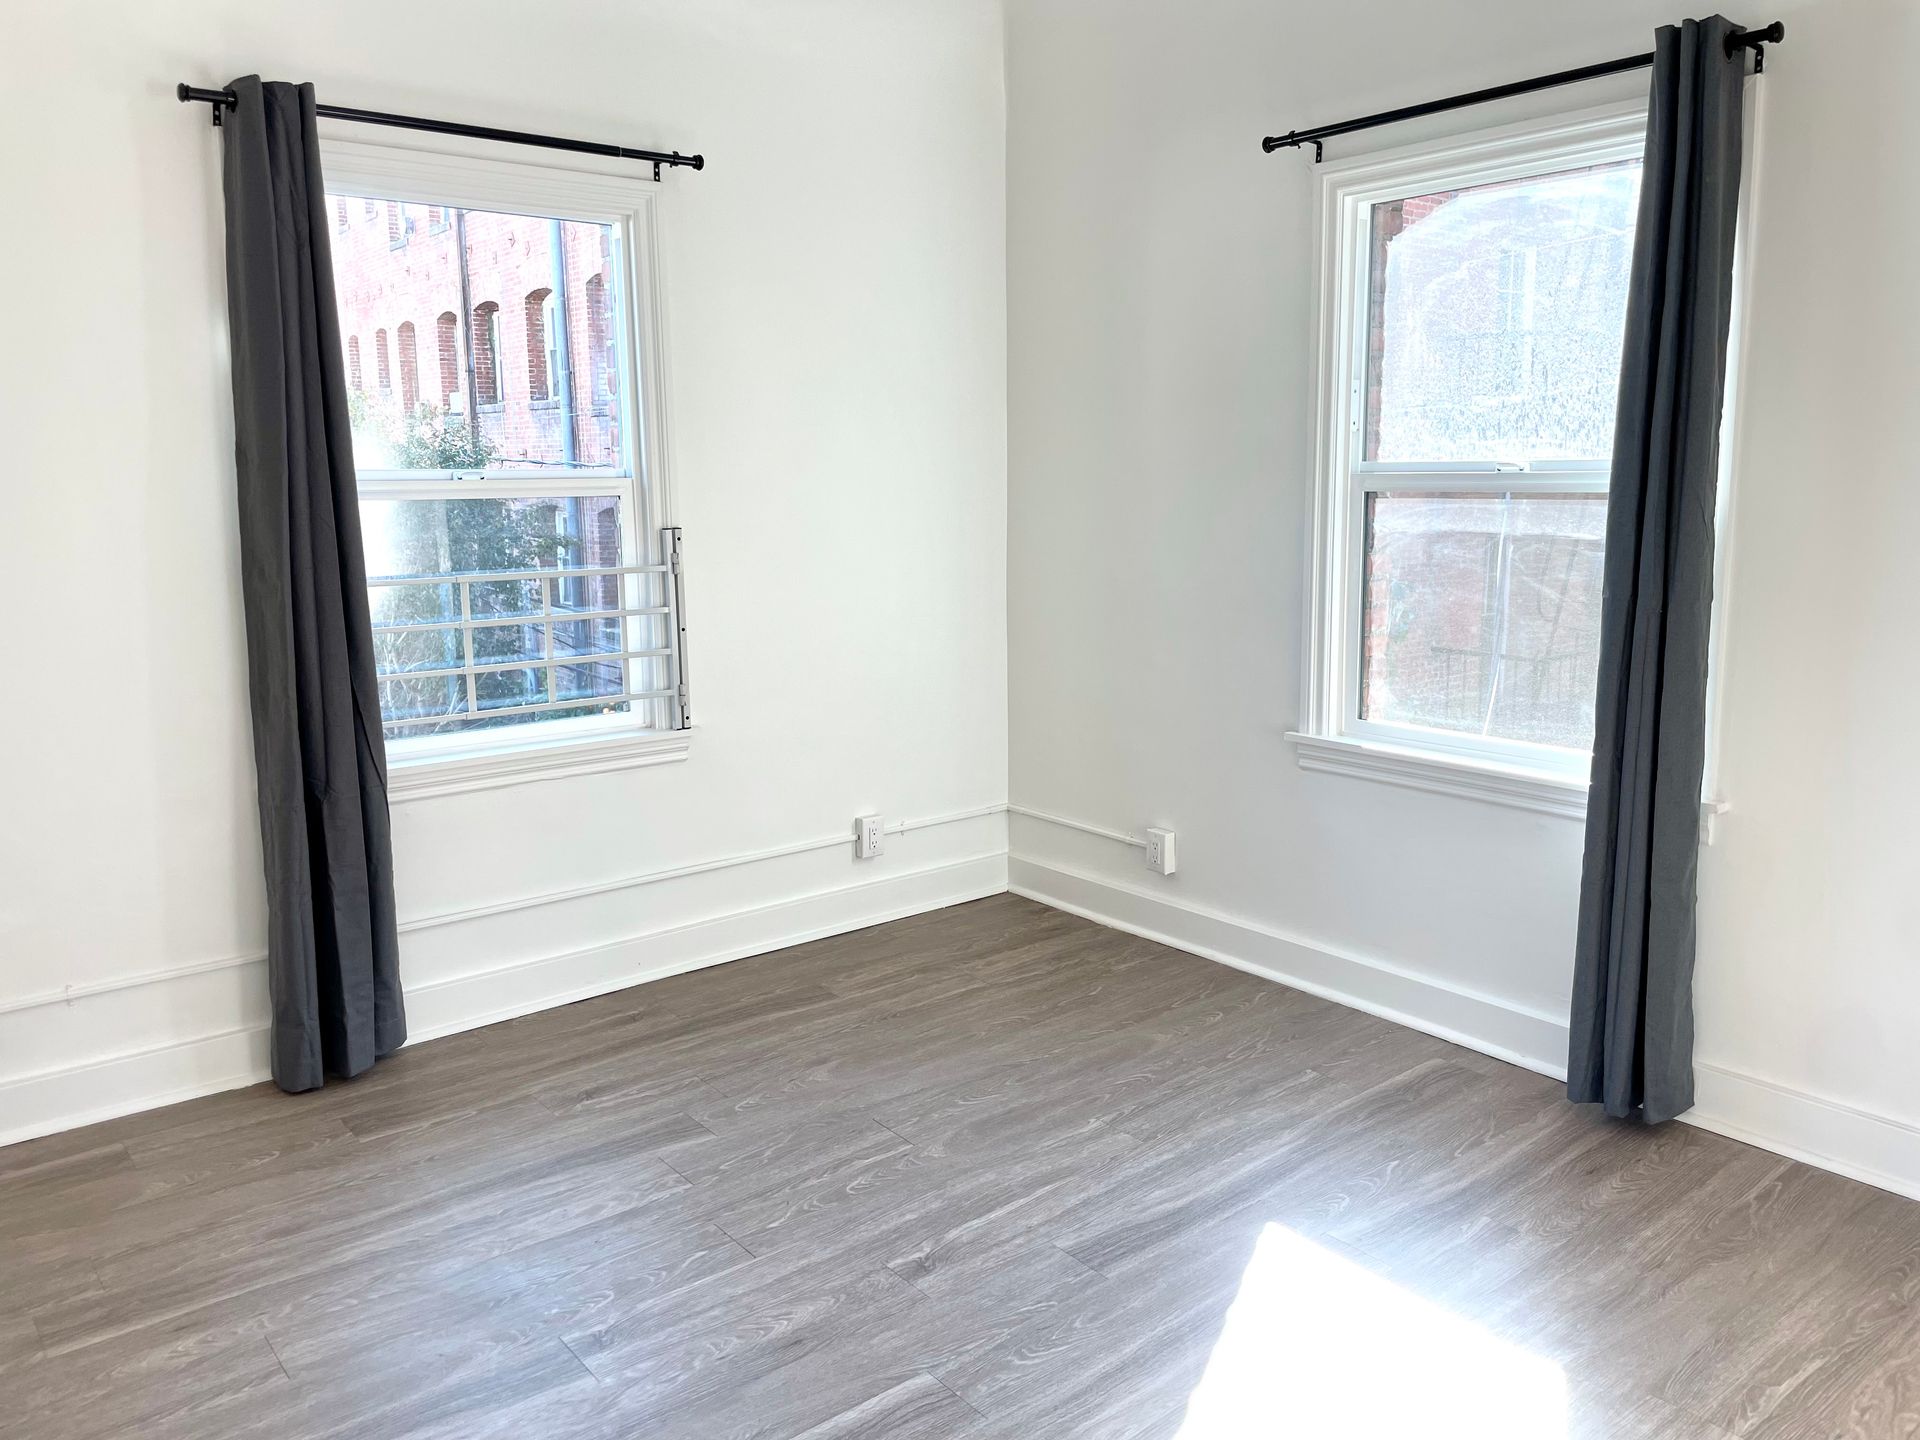 Interior photo of the Ansley Apartments, showing 2 huge windows with curtains and lots of natural light